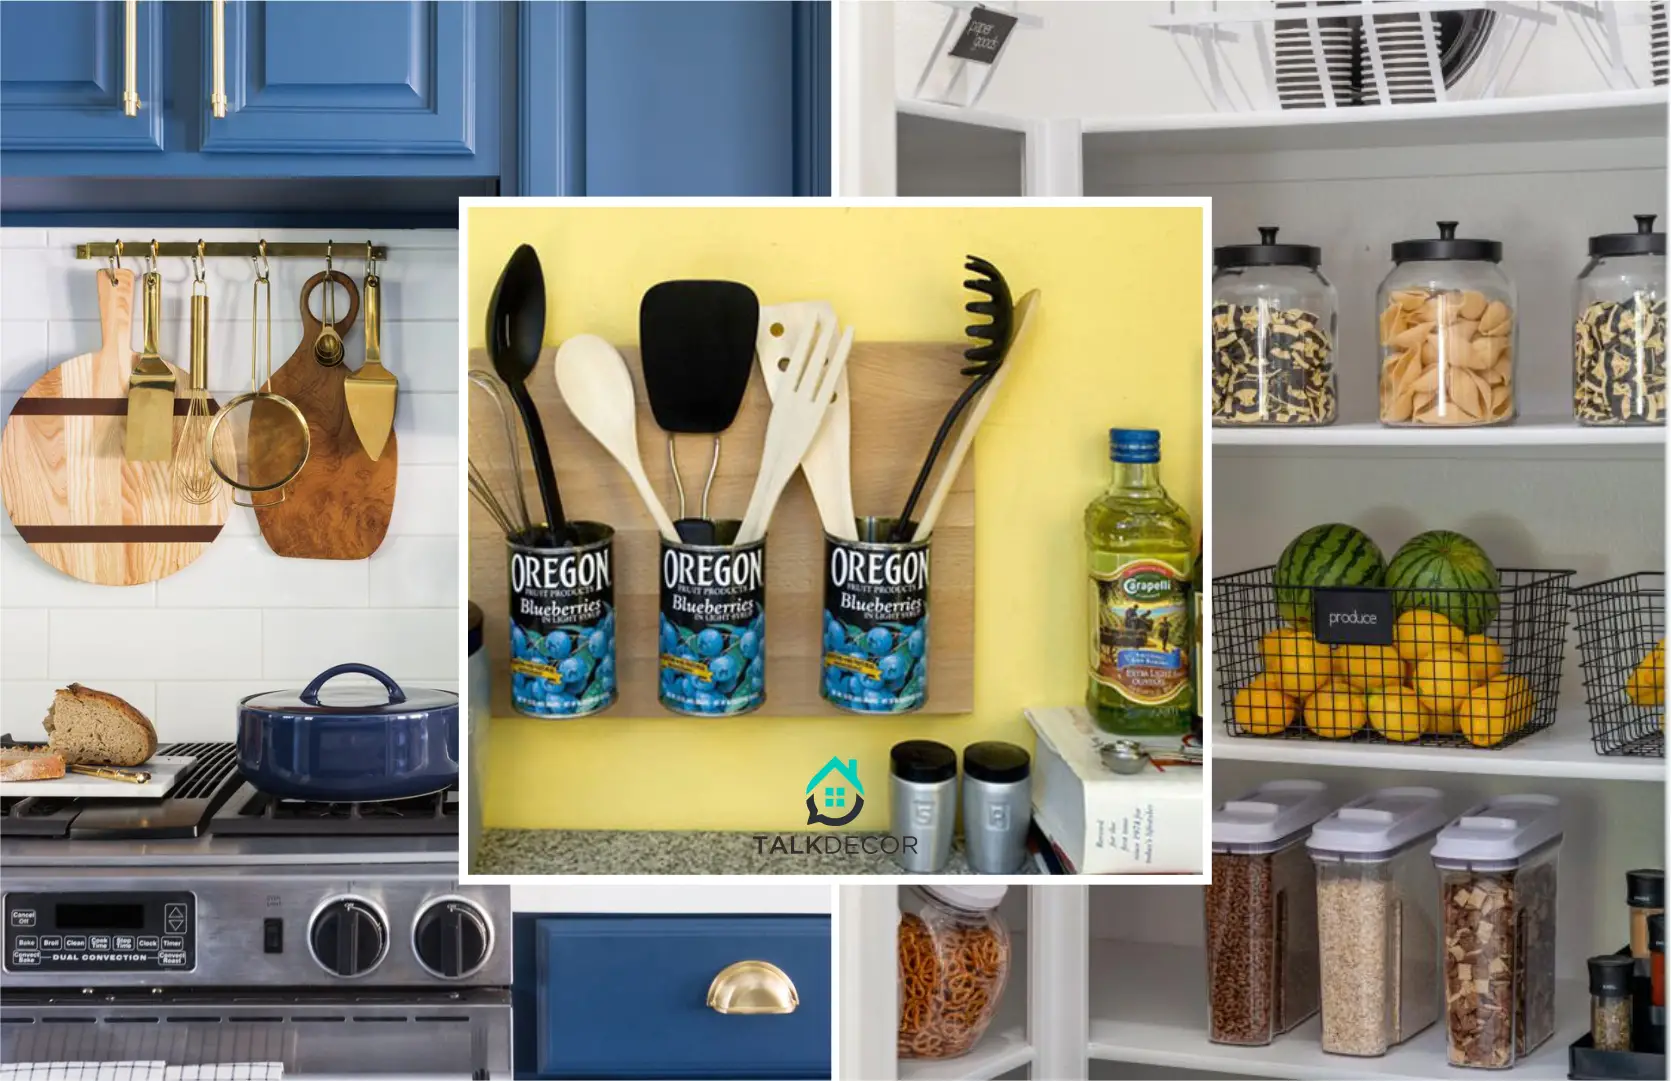 15 Simple DIY Kitchen Storage Ideas for Small Space